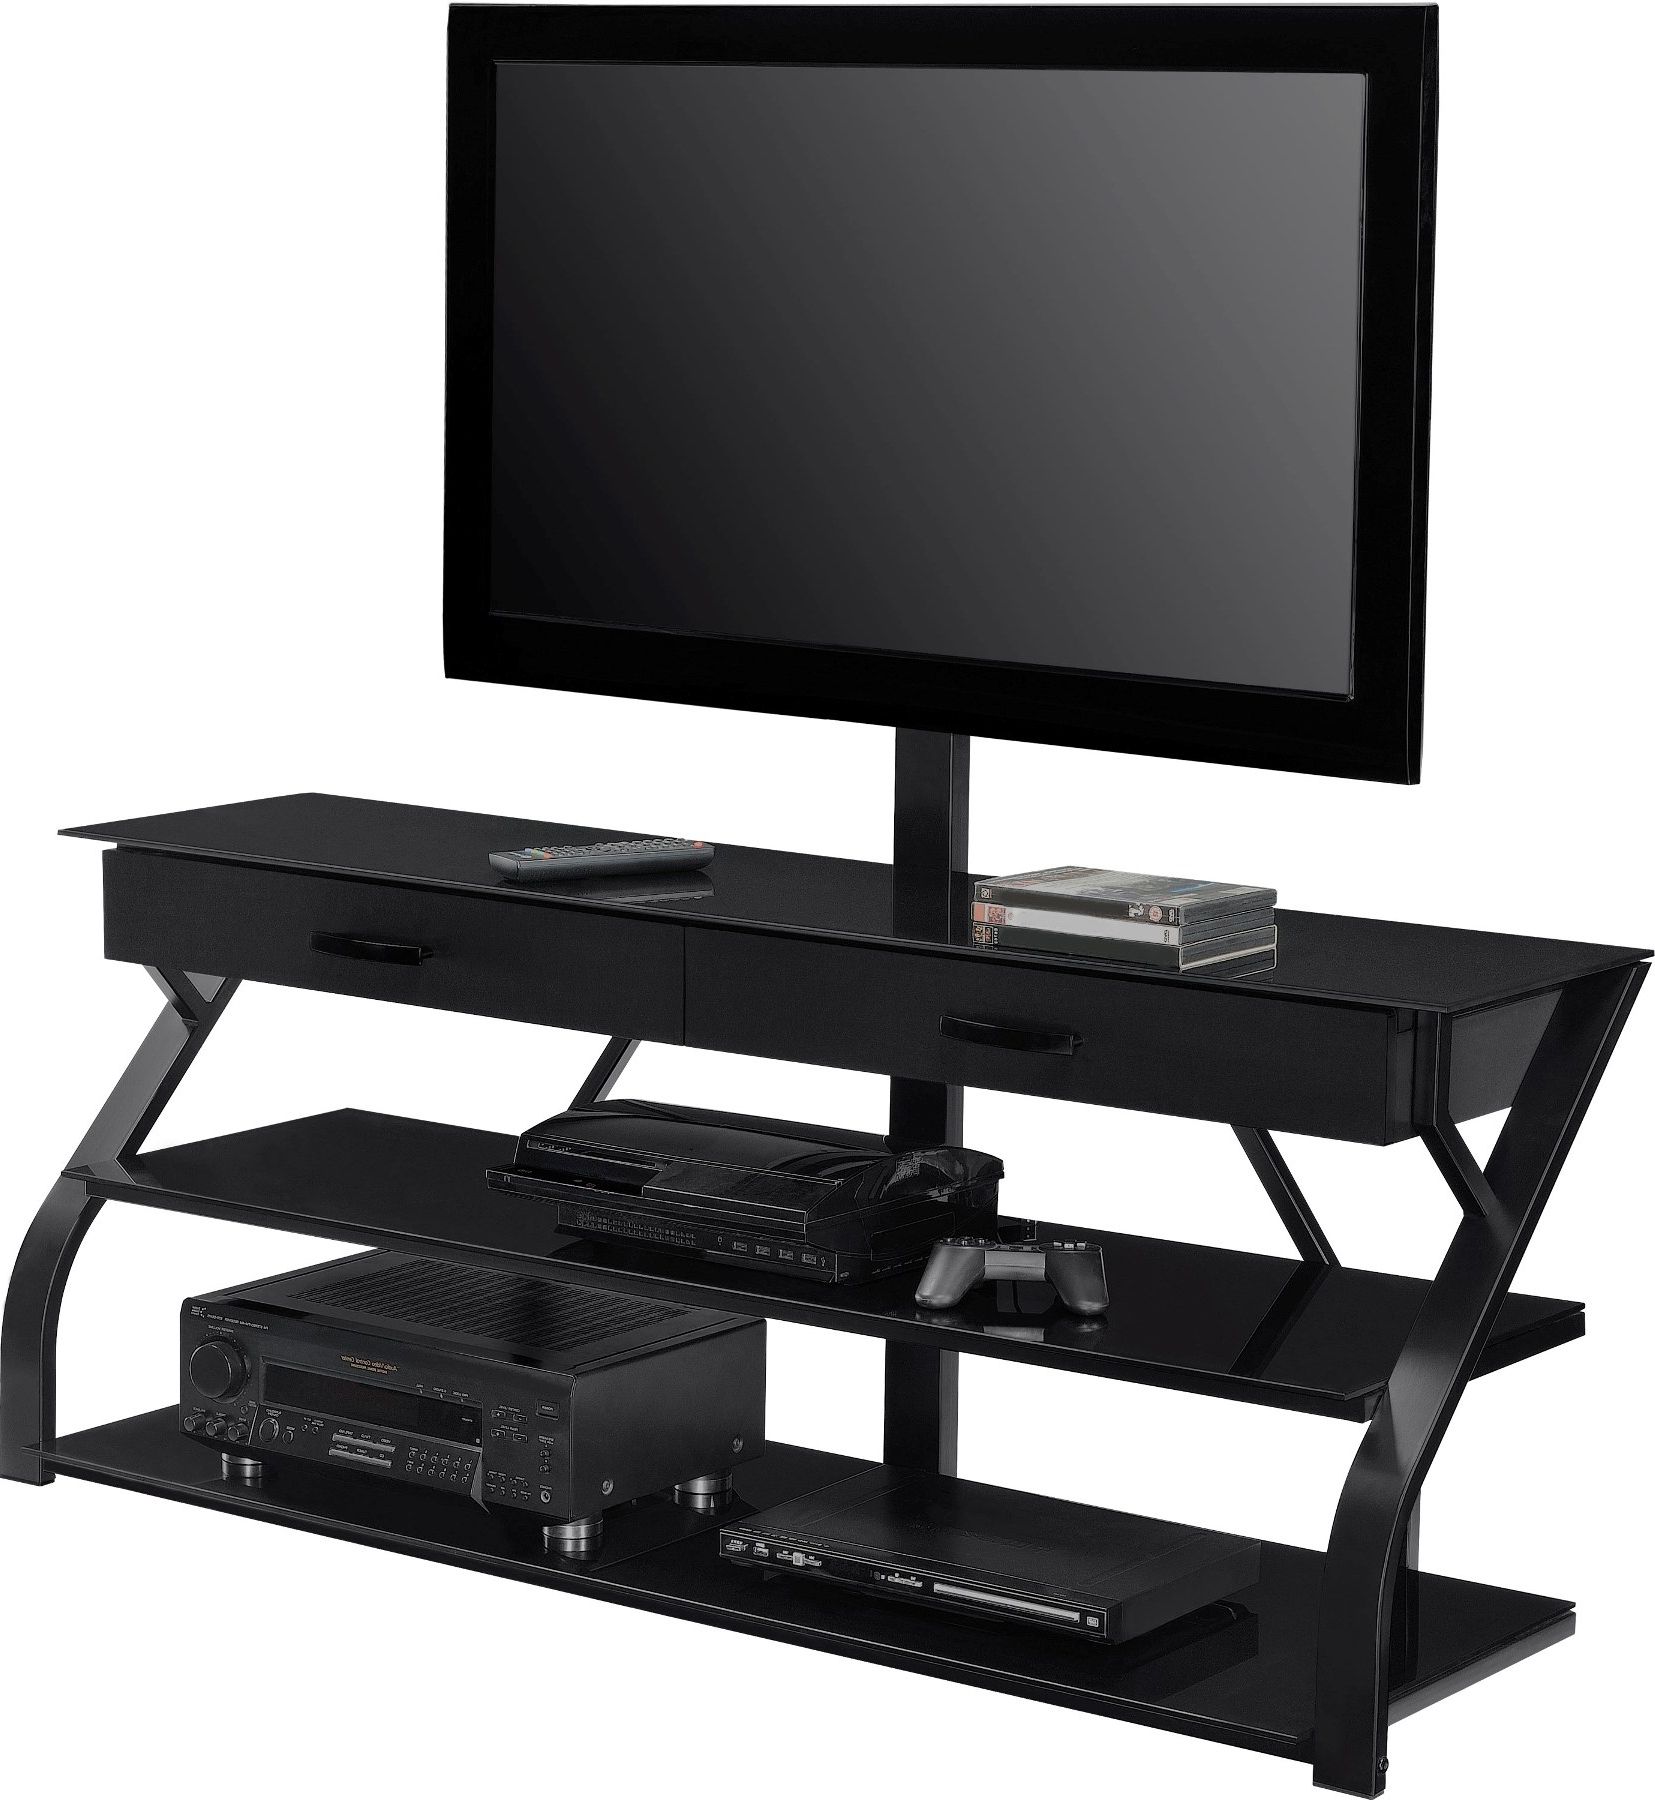 Swivel Black Glass Tv Stands Intended For Latest Black Glass Storage Tv Stand With Mount Of A Gallery Of Trendy Glass (Photo 2 of 20)